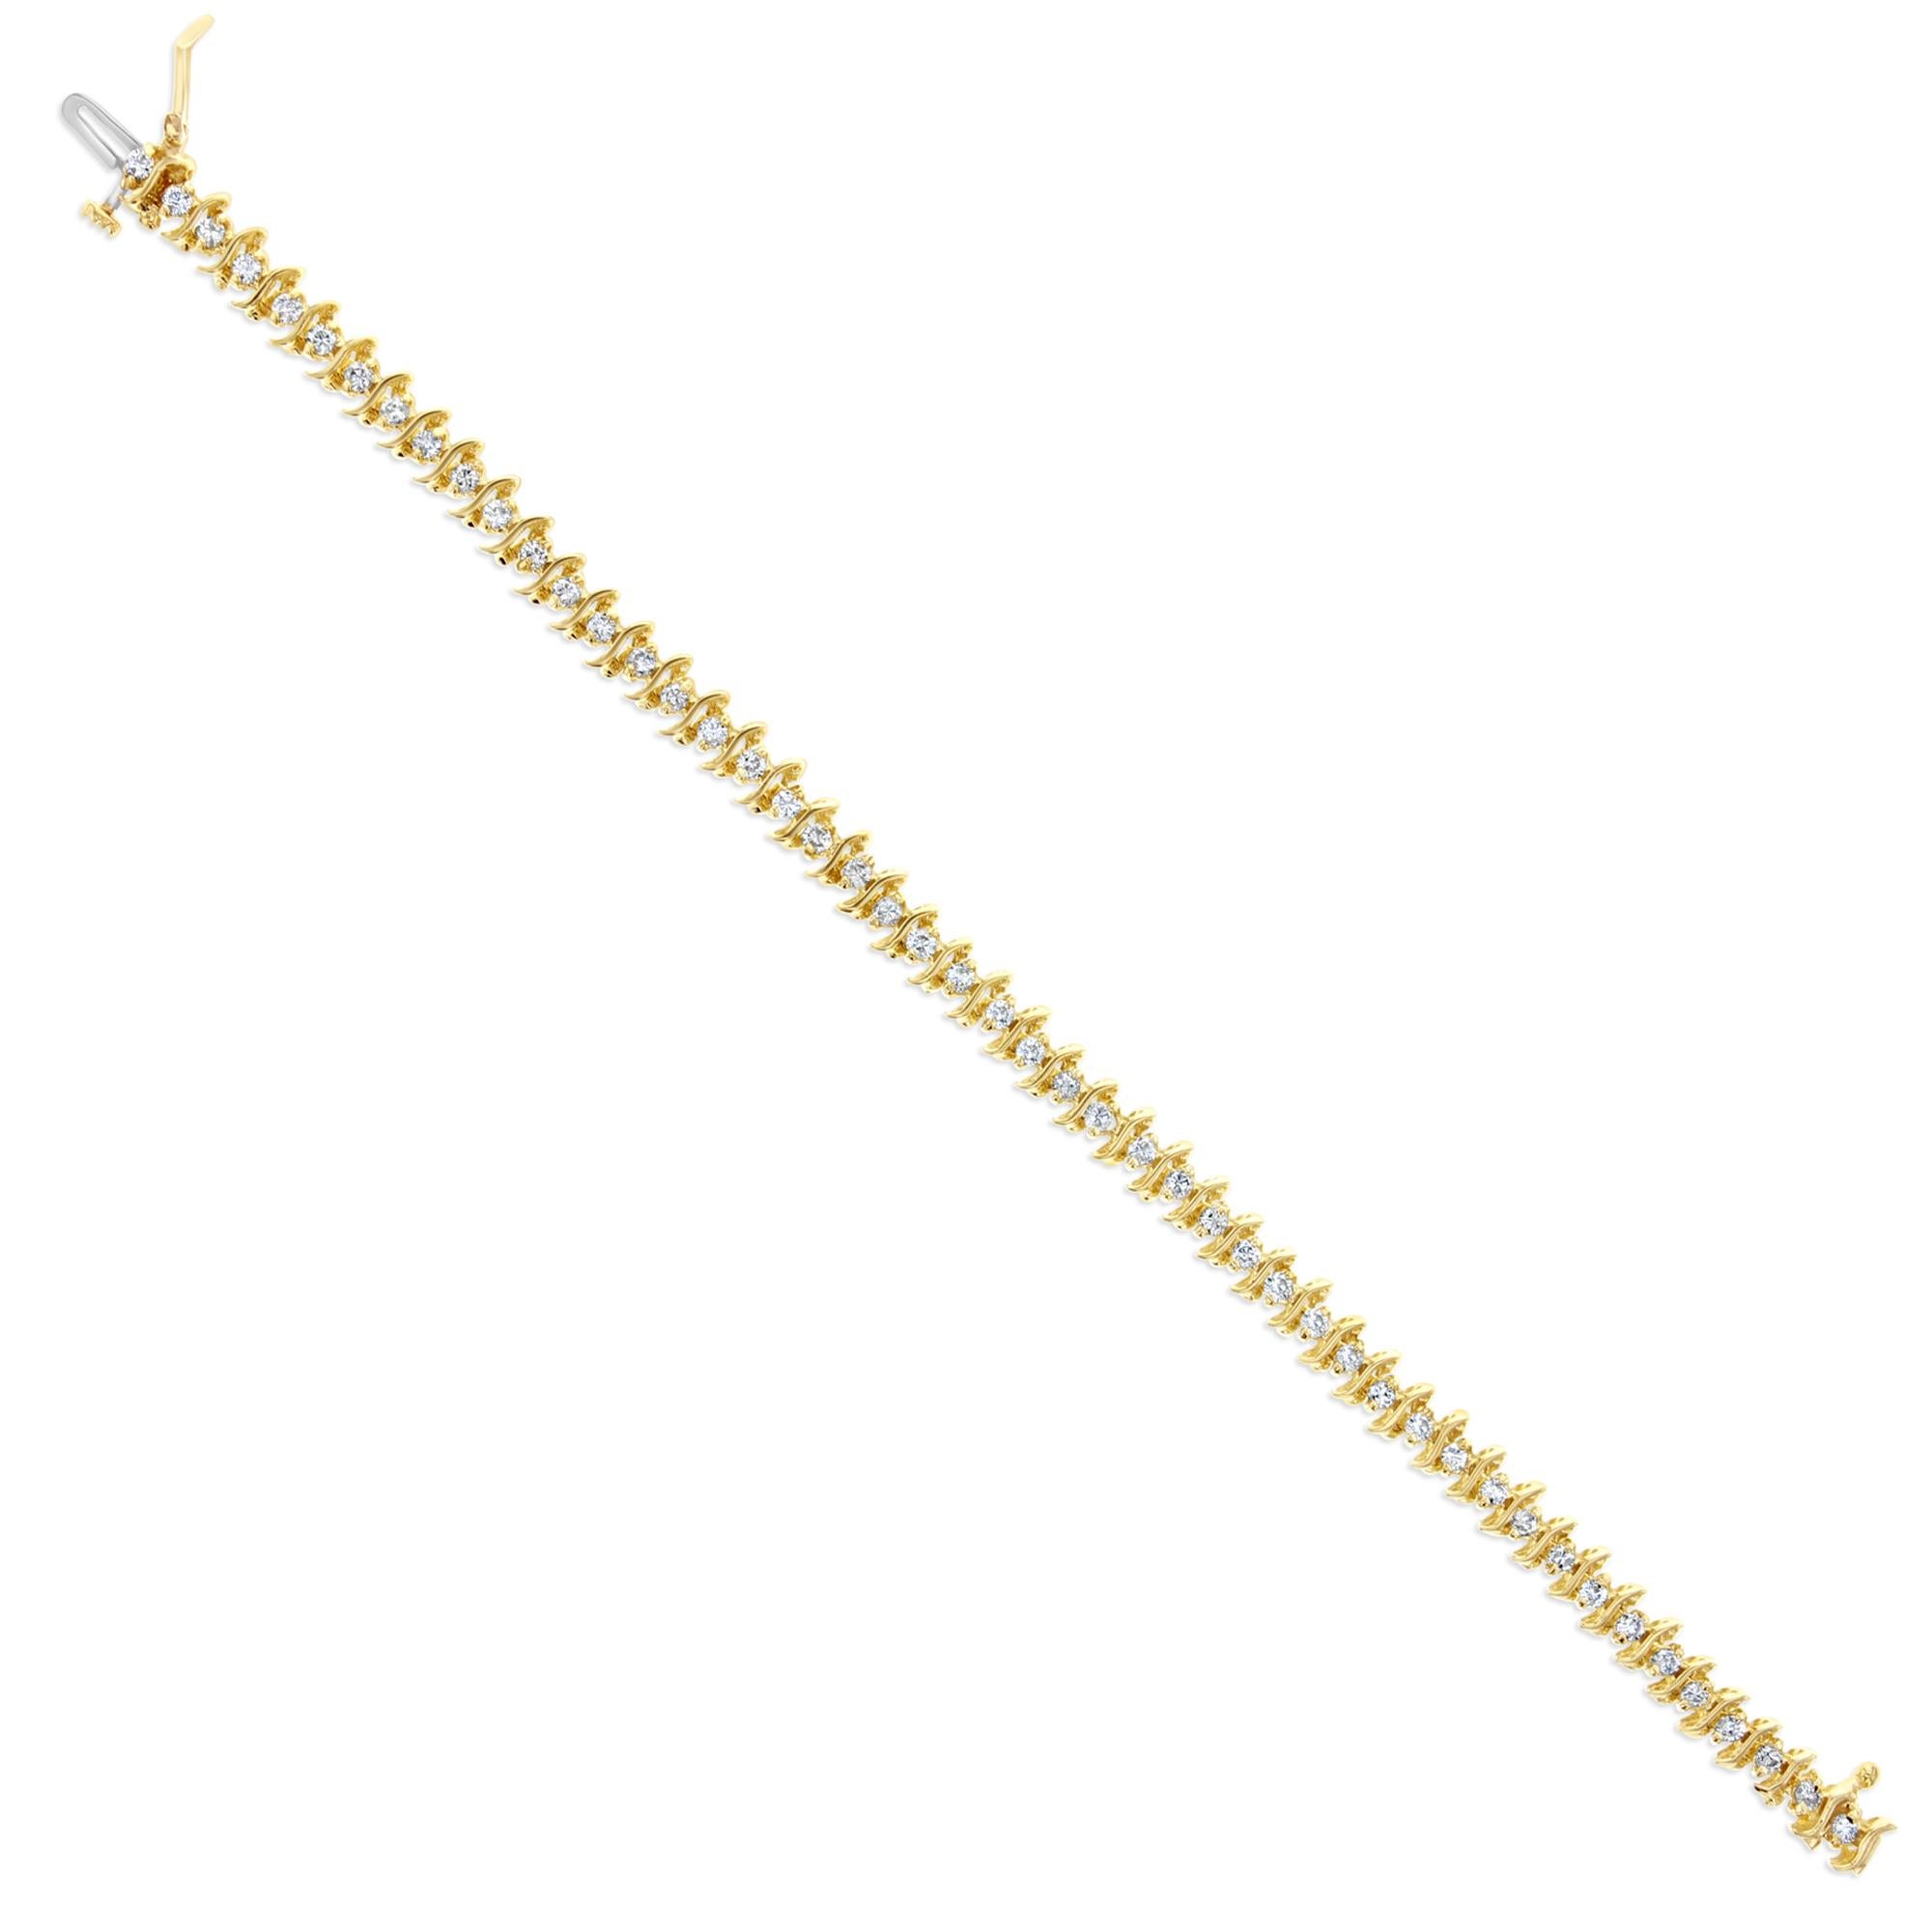 S Style Diamond Tennis Bracelet 2.50cttw 14k Yellow Gold In New Condition For Sale In Sugar Land, TX